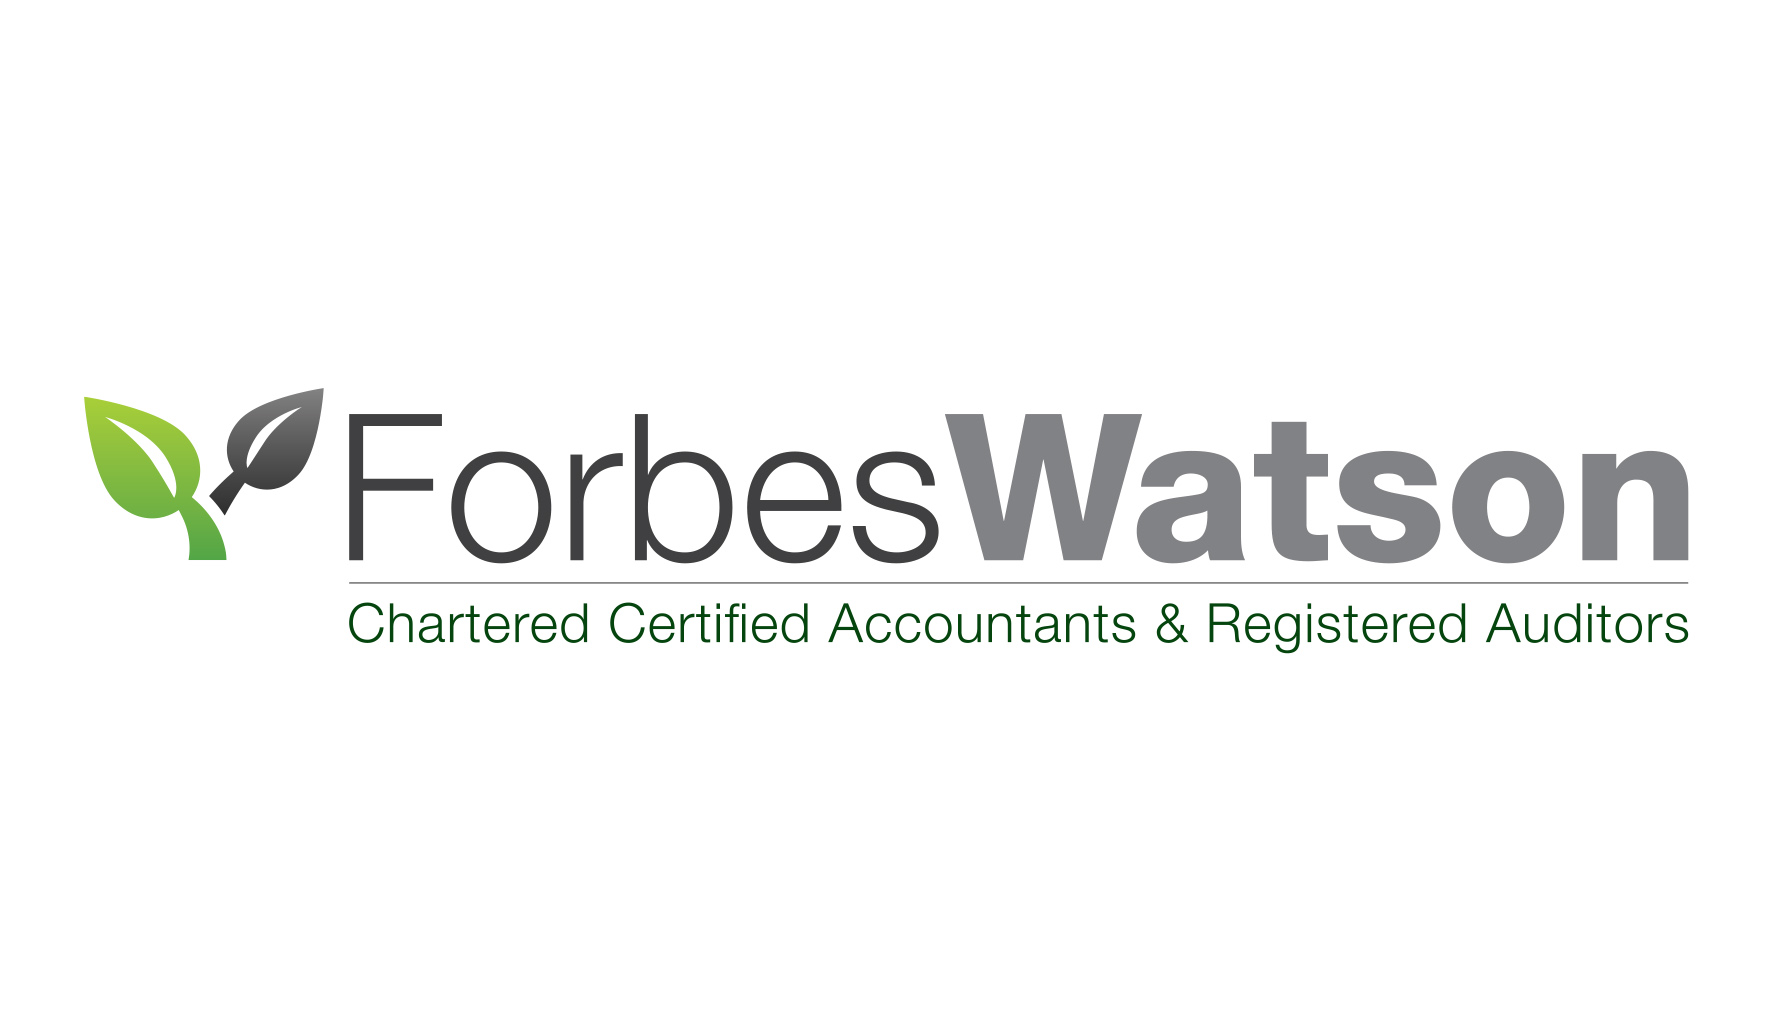 Forbes Watson Chartered Certified Accountants and Registered Auditors